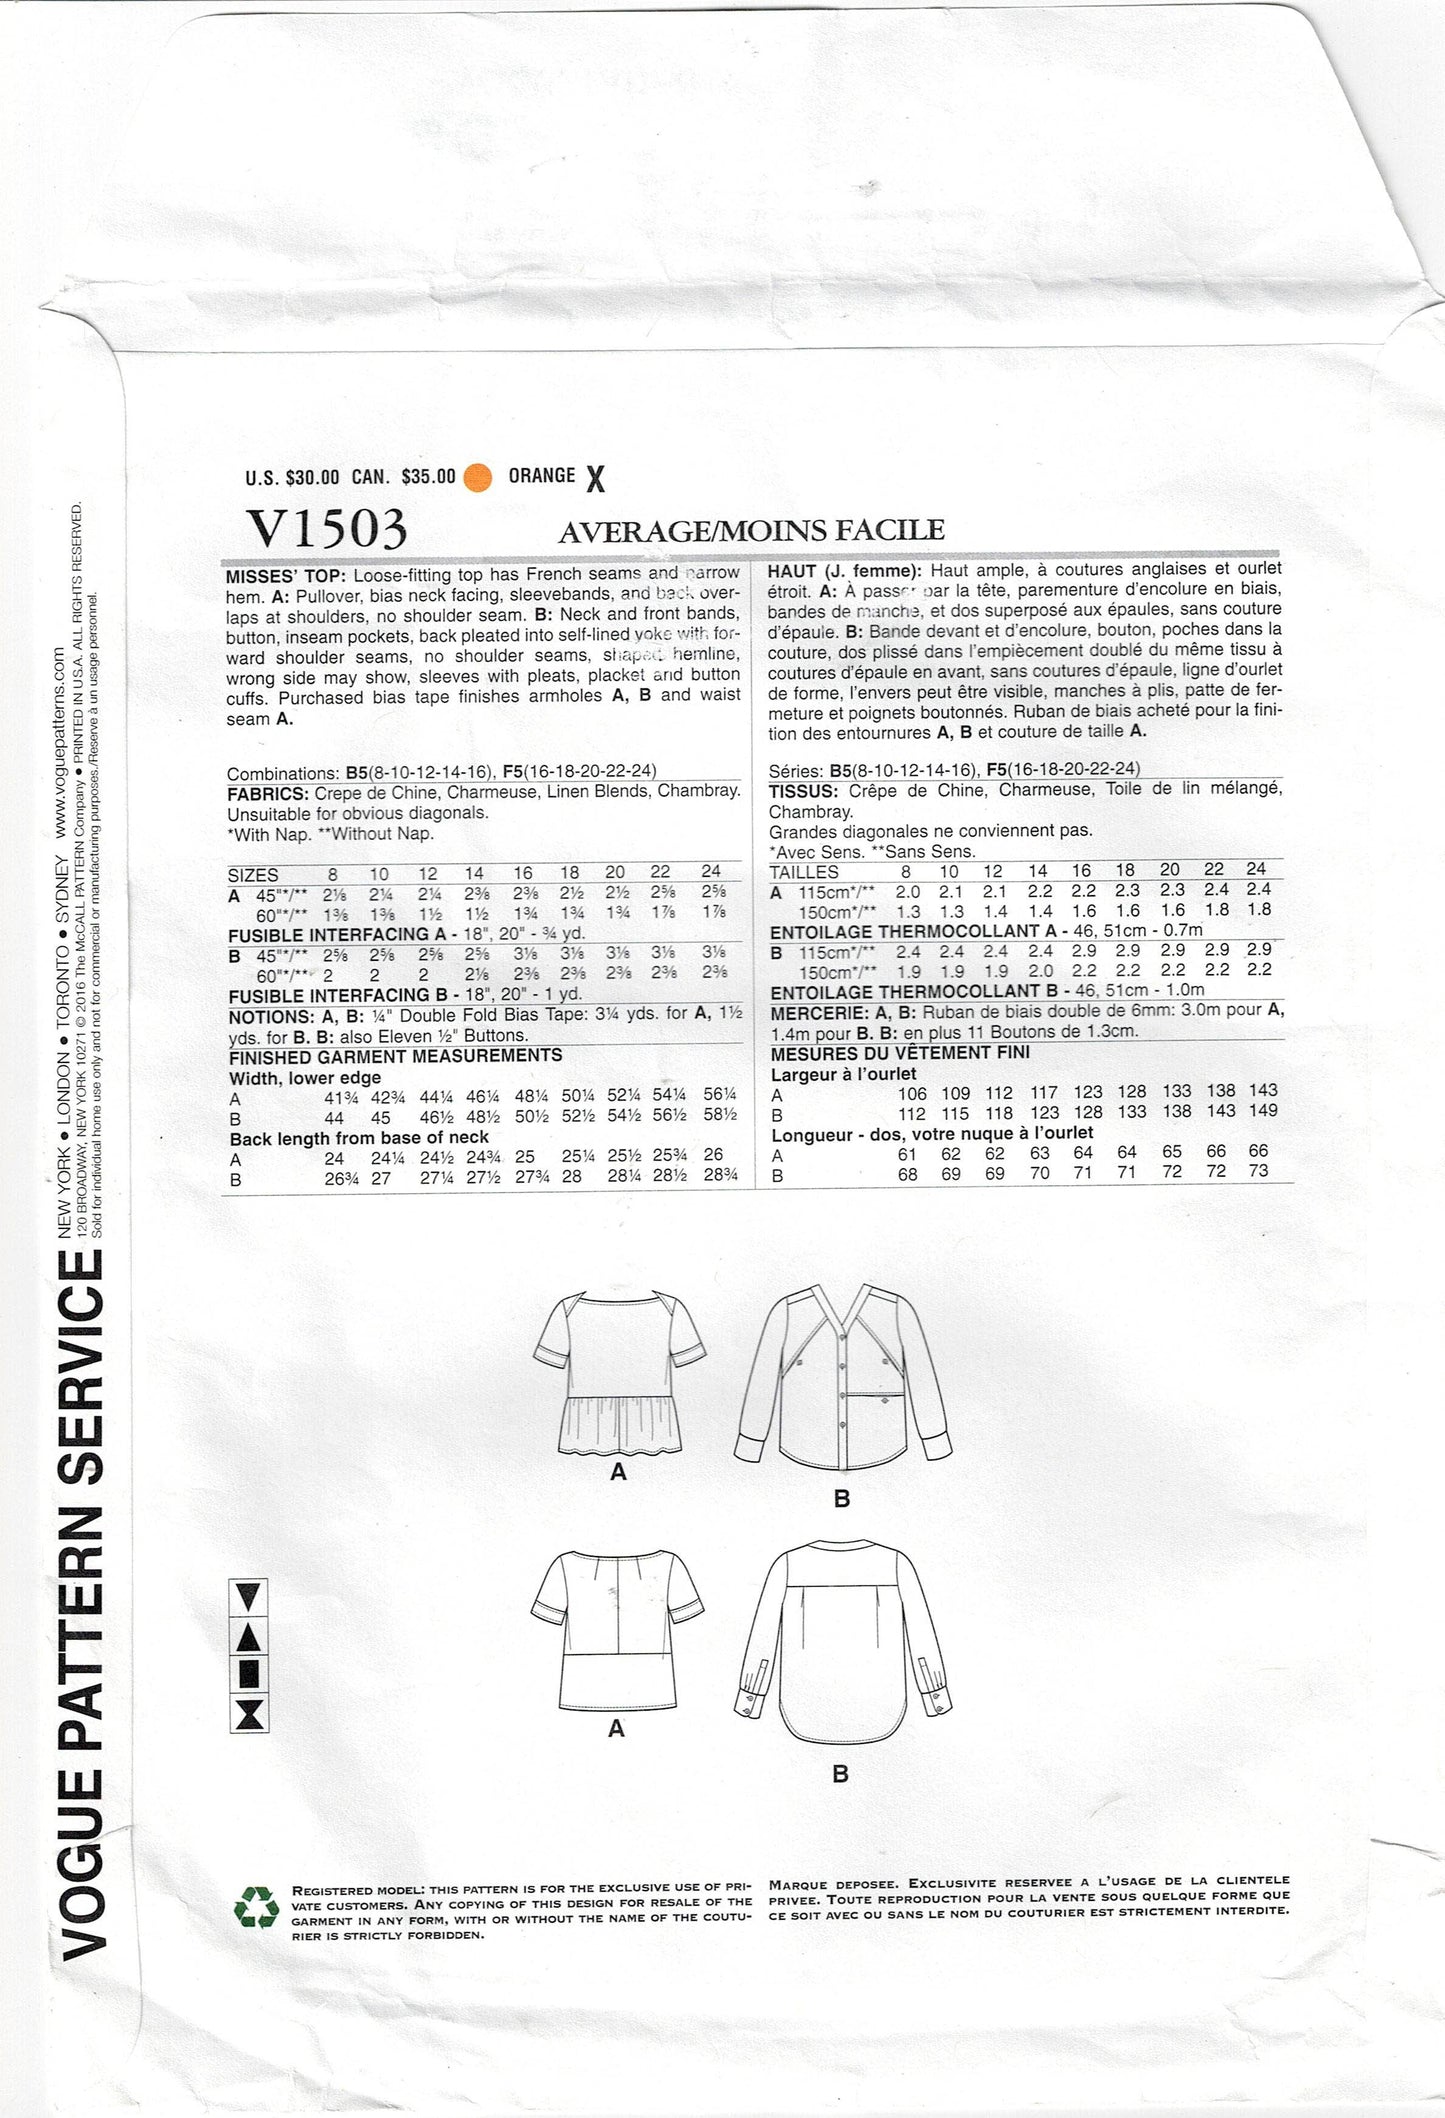 Vogue American Designer 1503 RACHEL COMEY Womens Ruffled Pullover or Front Buttoned Tops Out Of Print Sewing Pattern Size 8 - 16 UNCUT Factory Folded